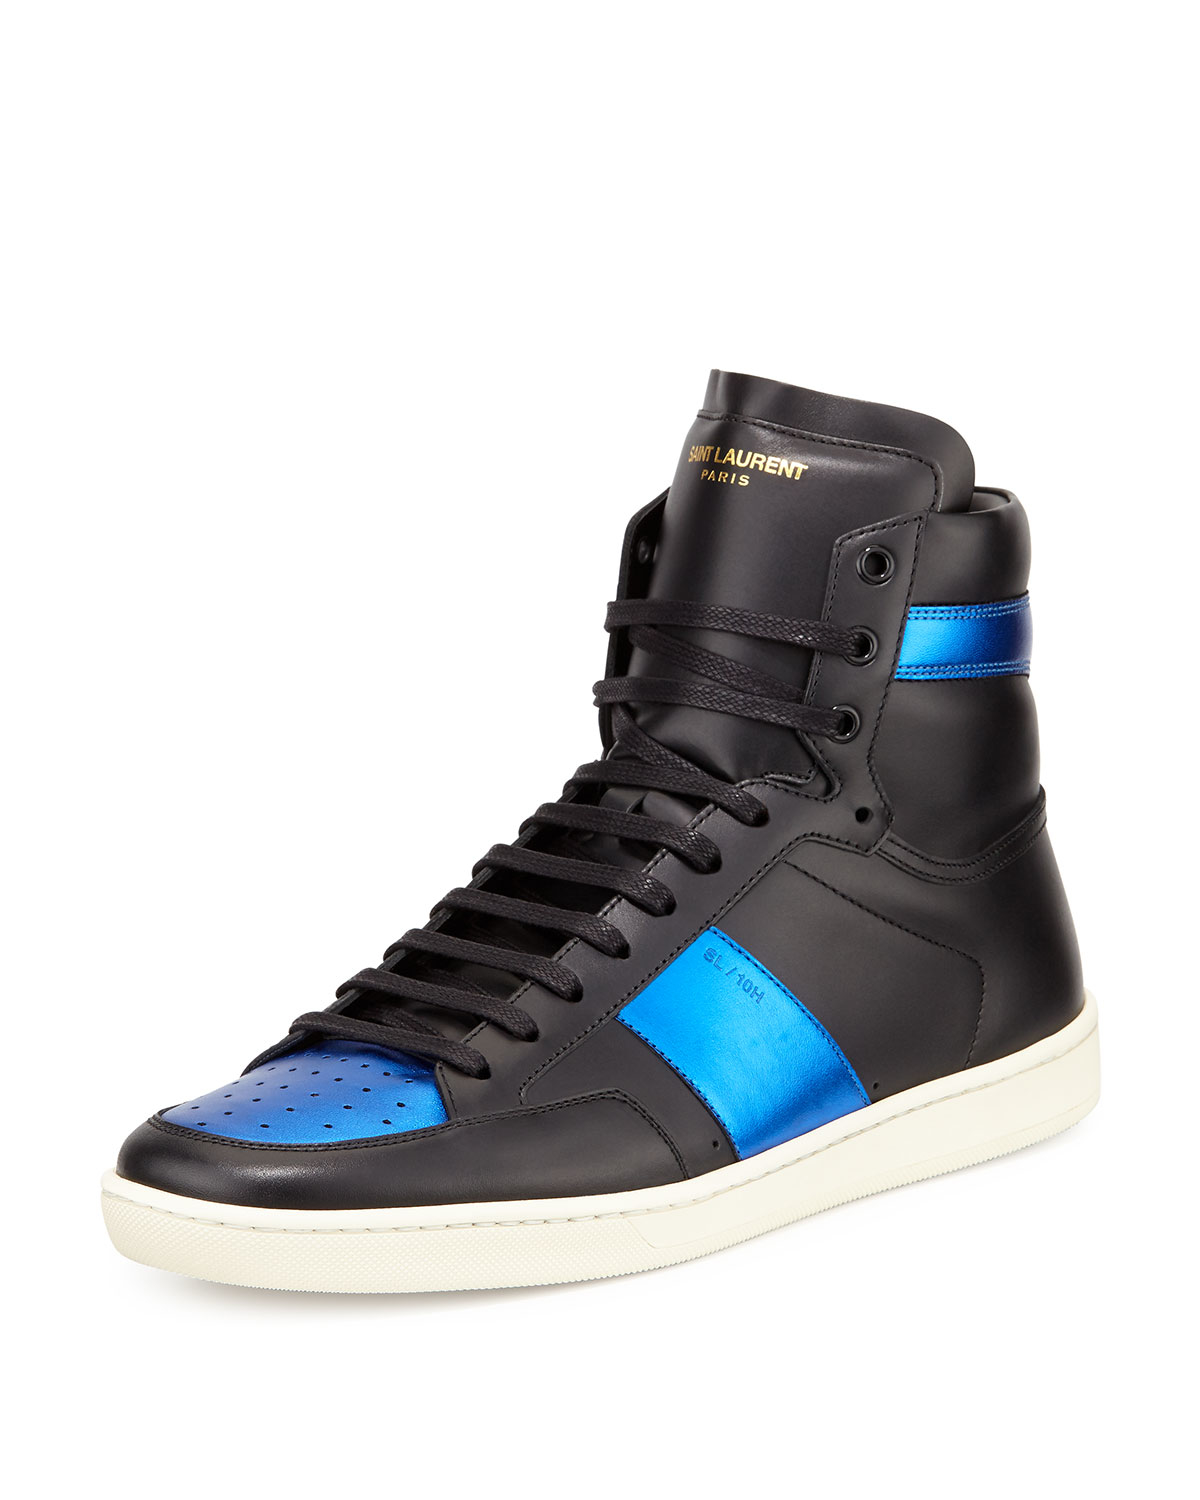 Lyst - Saint Laurent Leather High-Top Sneakers in Blue for Men